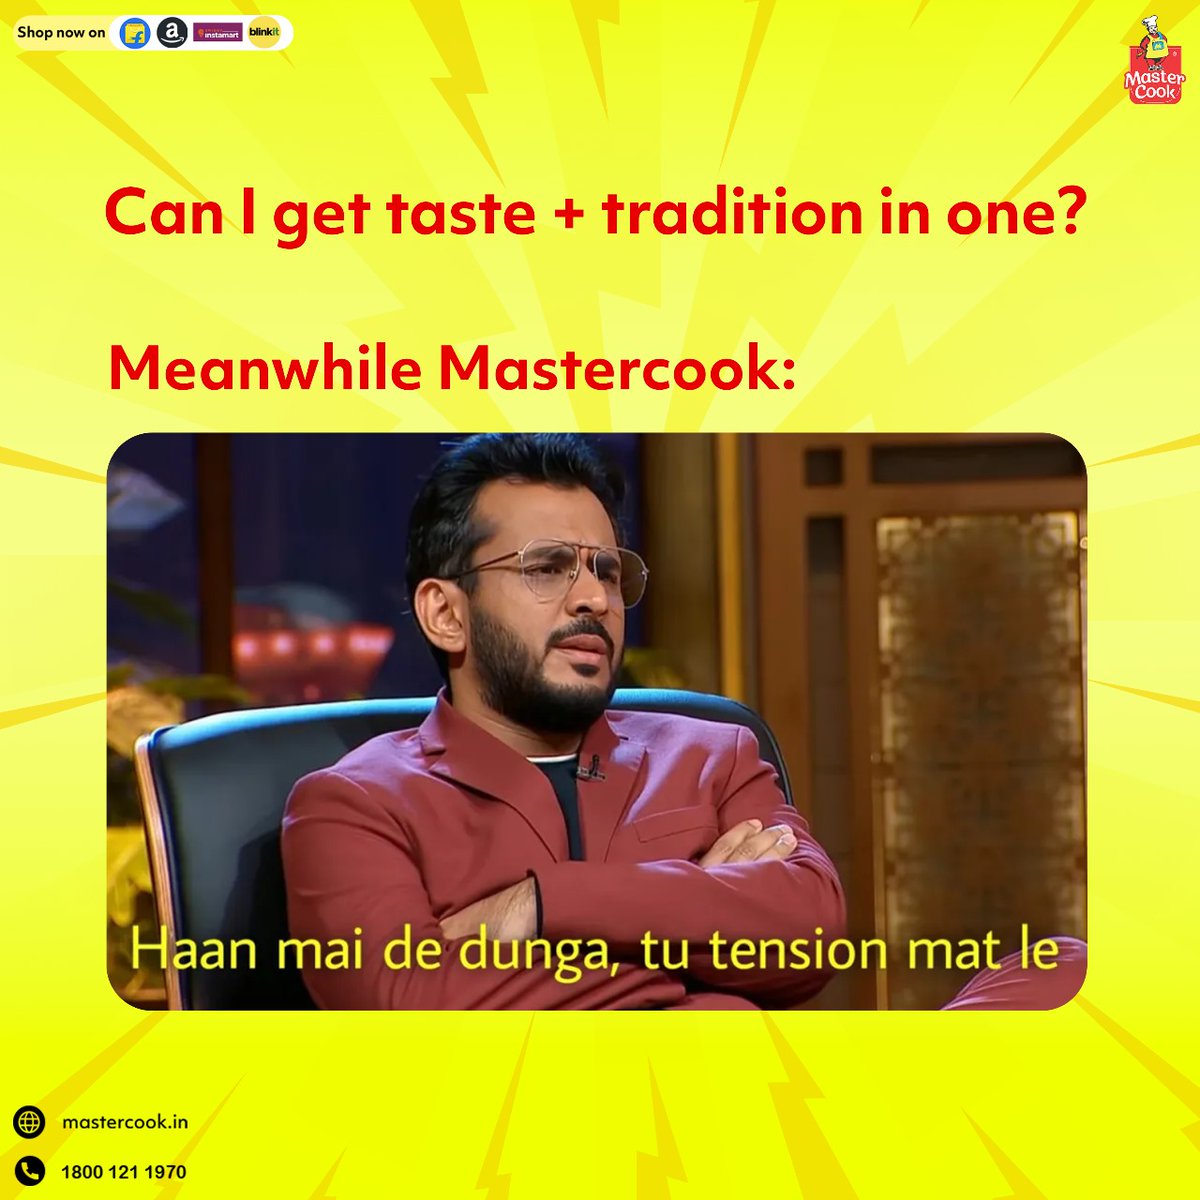 Why Fear when Mastercook is here?😙😎 Taste + Tradition + Nominal Pricing, We got you covered!✨ Check out the link in our bio and claim your discount now. #mastercook #SavingsAlert #discountedprice #foryoü #sharktank #amangupta #sharks #SharkTankIndia